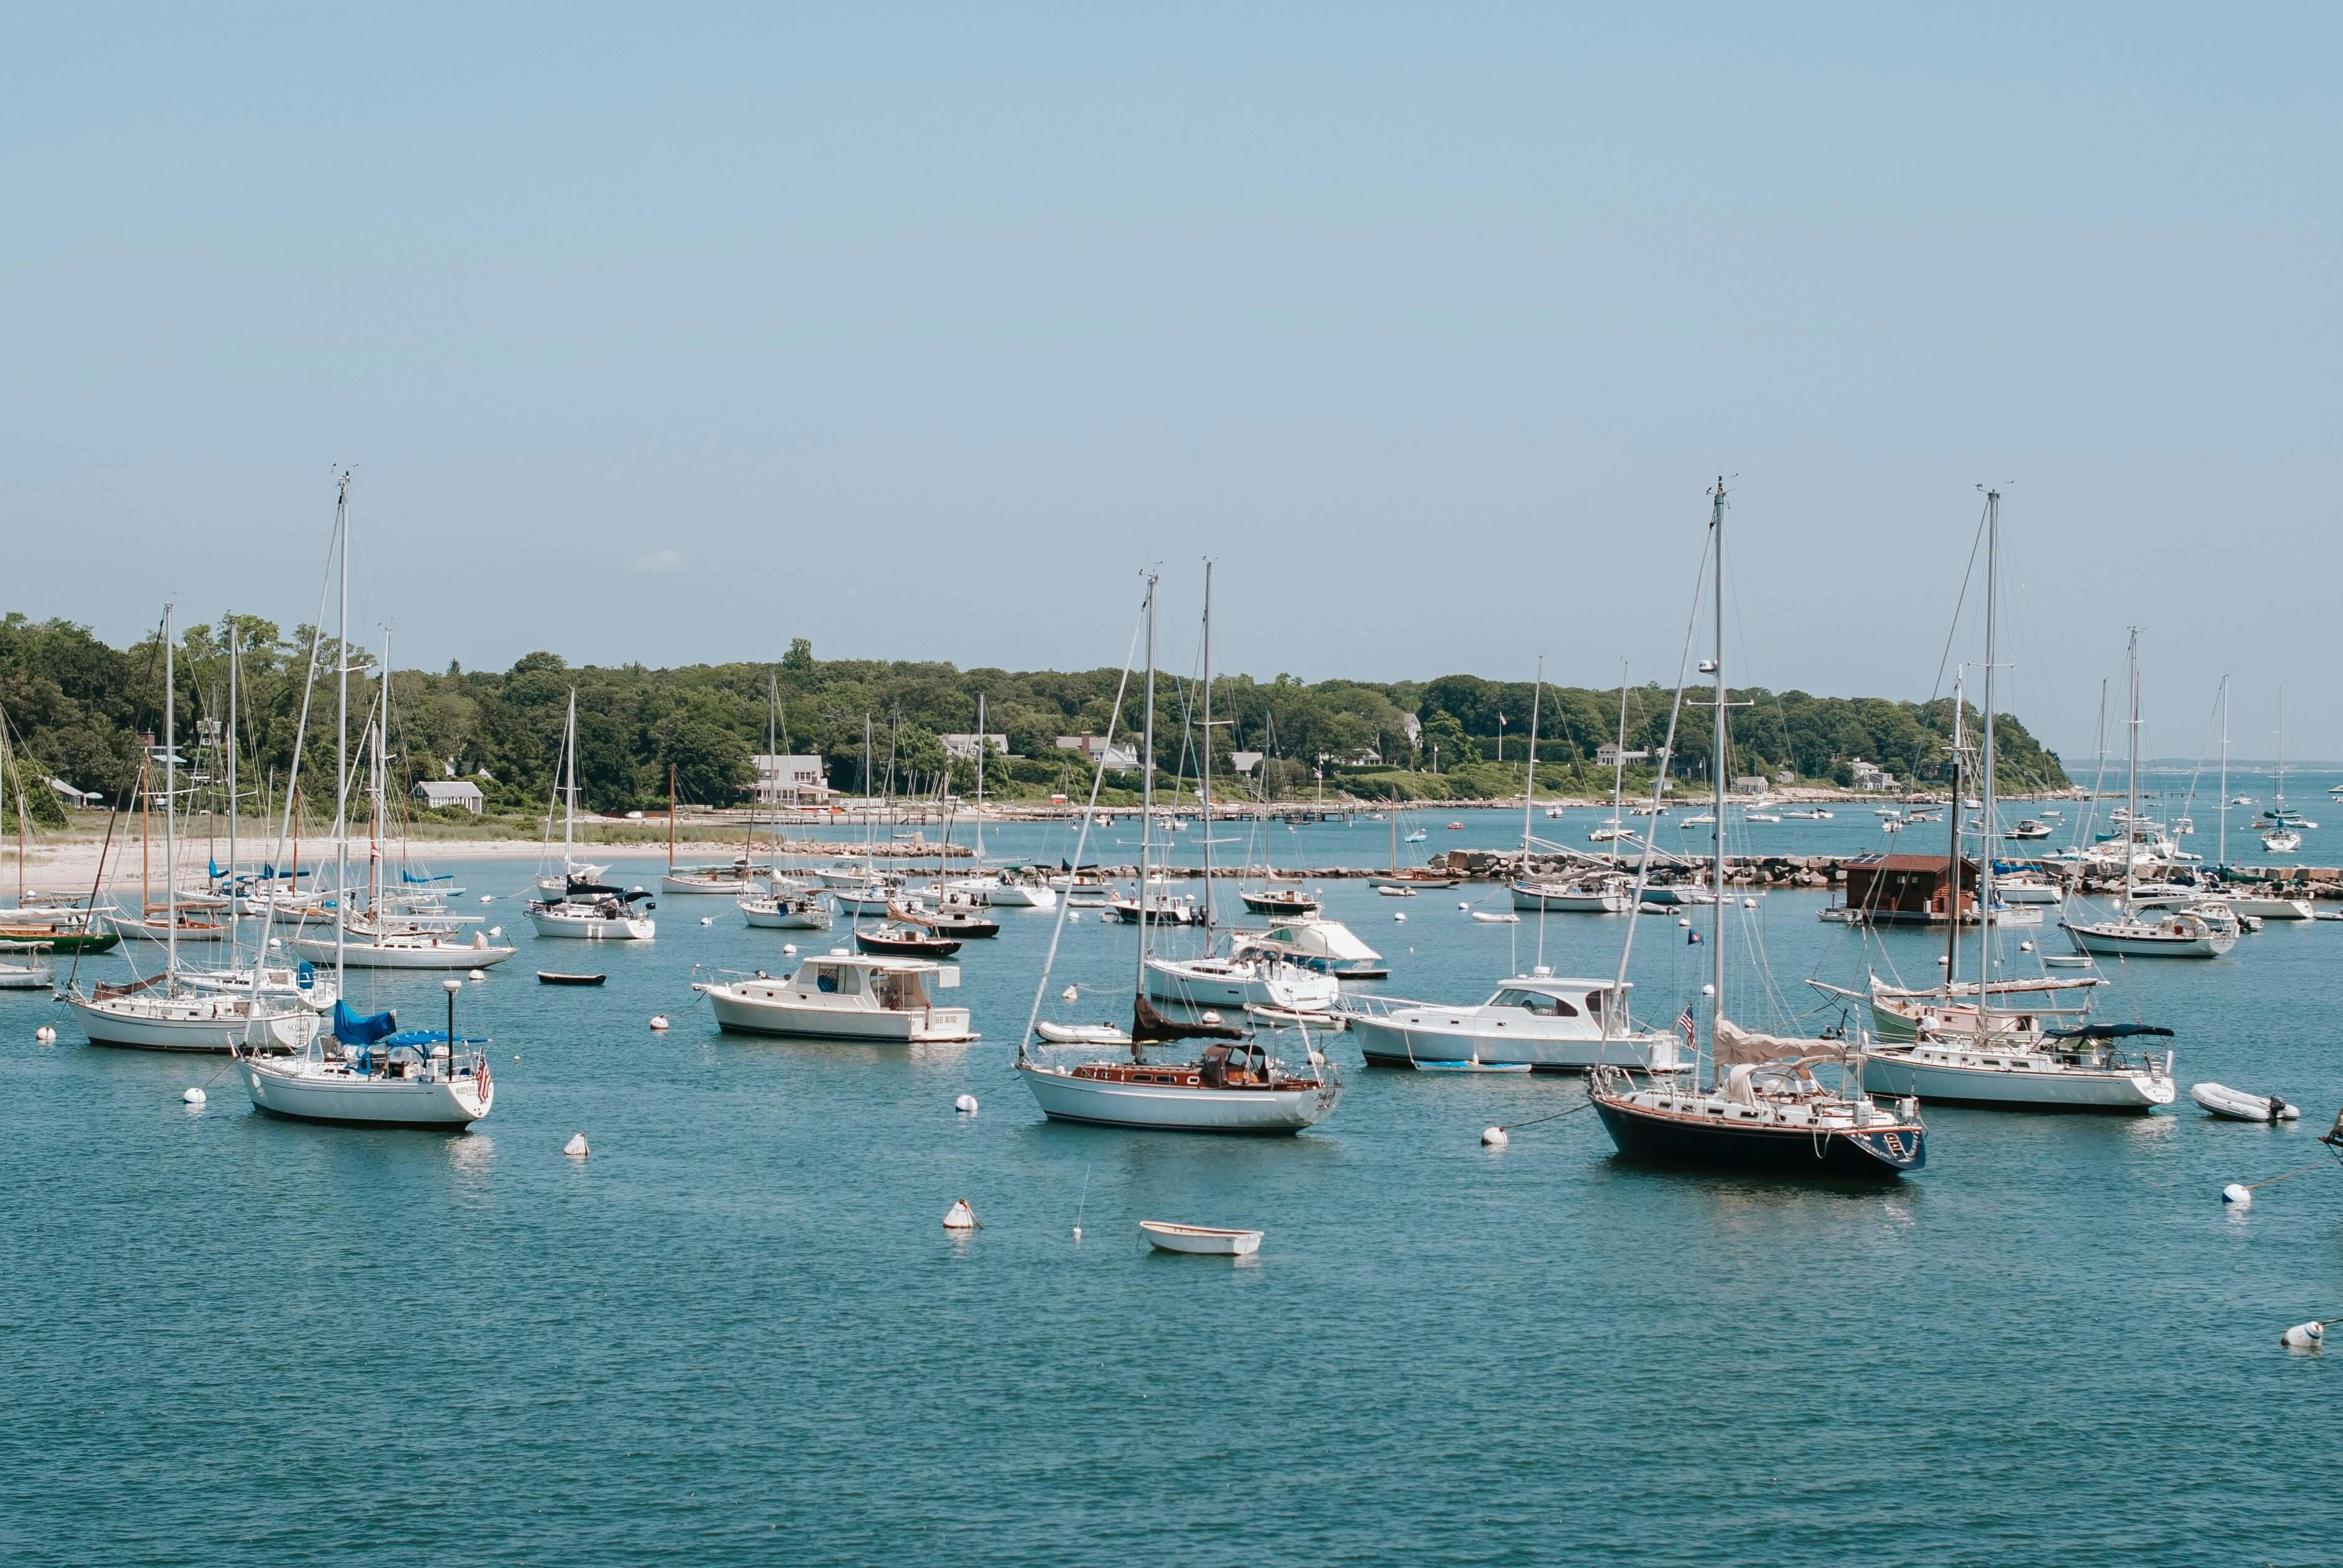 Whether it's strolling through the towns, discovering hidden gems, hiking our beautiful trails, or trying local delicacies–the homes we list are carefully selected to ensure you enjoy the full extent of everything Martha's Vineyard has to offer. Contact the Rental Department directly at (508) 560-7378 for help with finding the ideal listing.